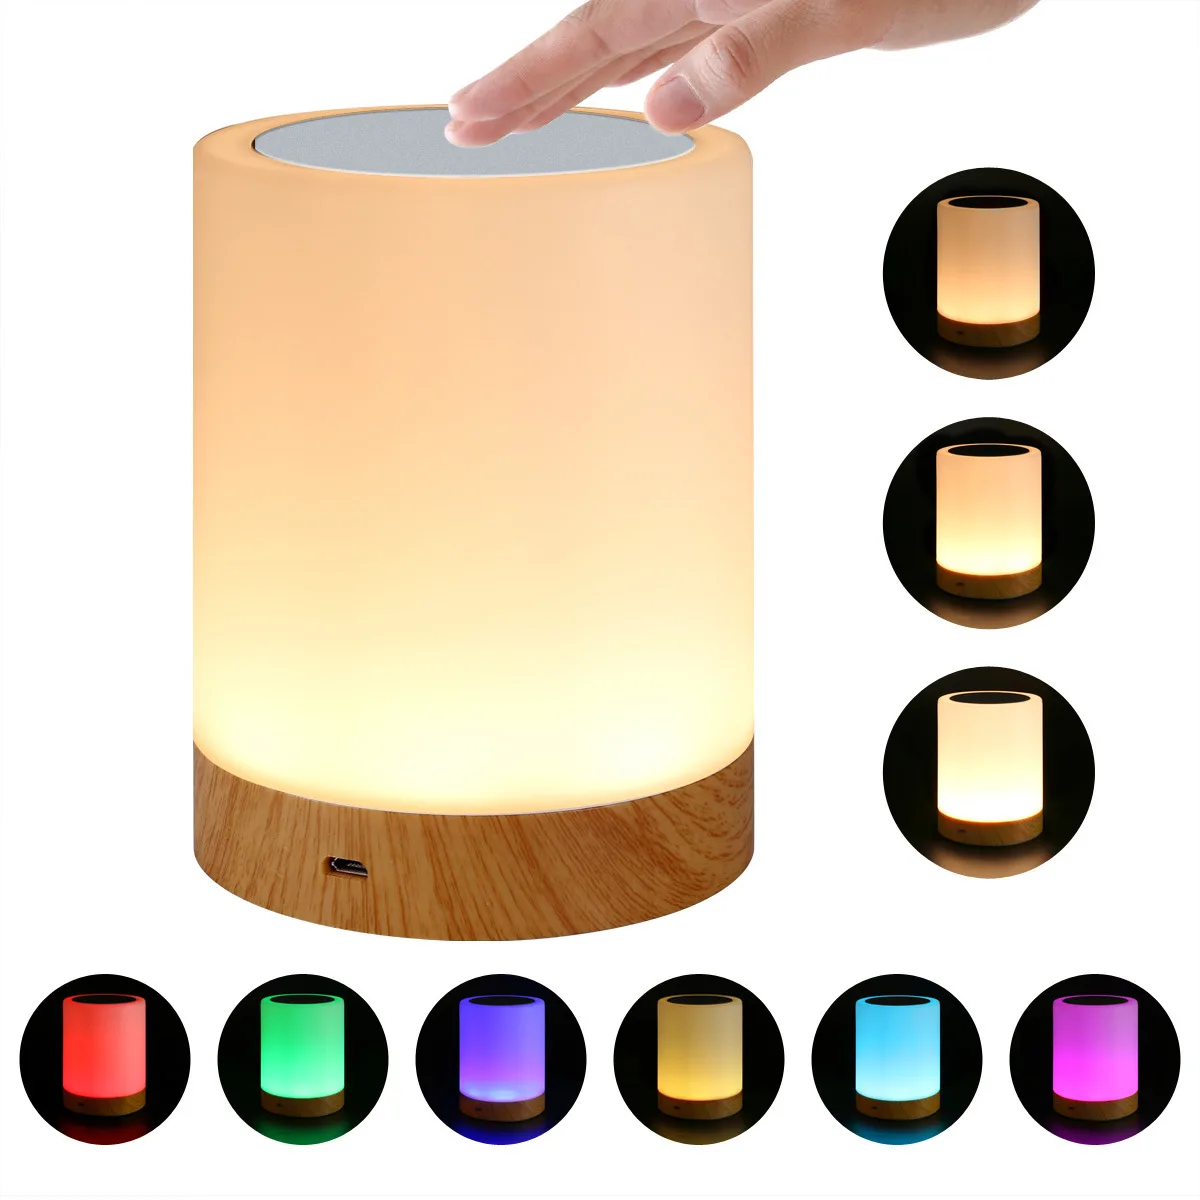 

Adjustable LED seven color creative wood grain rechargeable night light bedside table light atmosphere light touch light